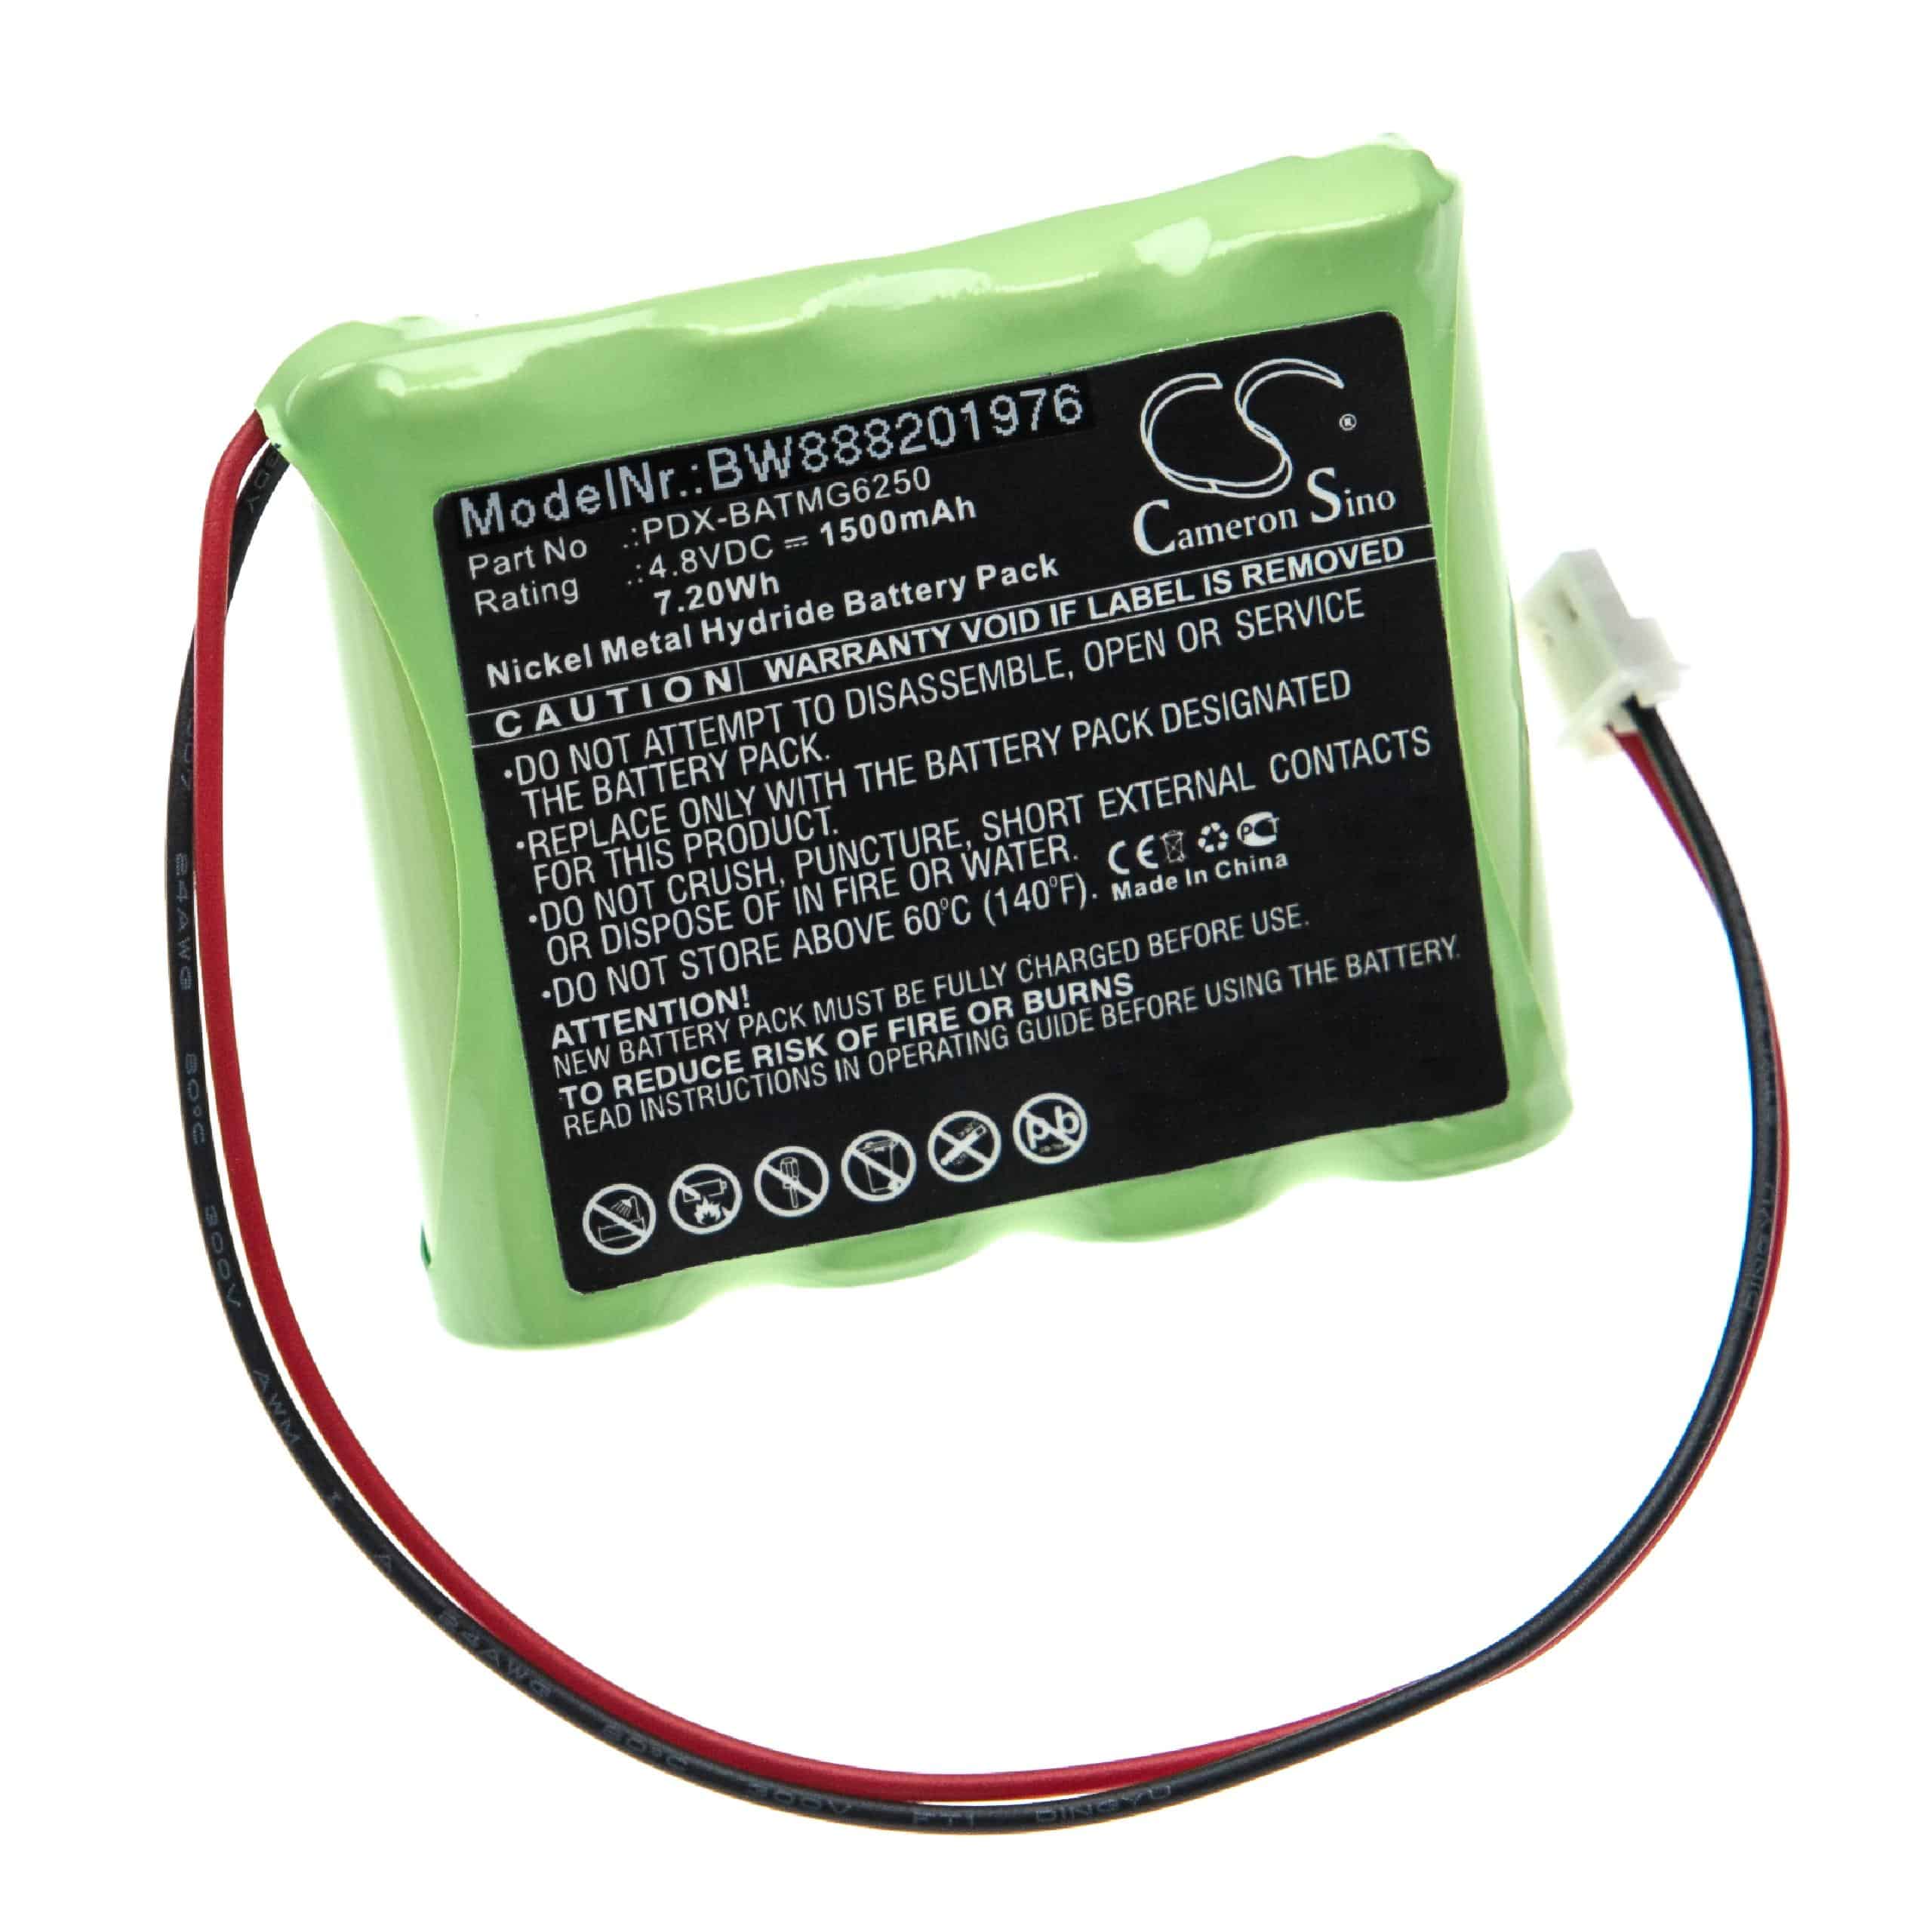 Alarm System Battery Replacement for Paradox PDX-BATMG6250 - 1500mAh 4.8V NiMH